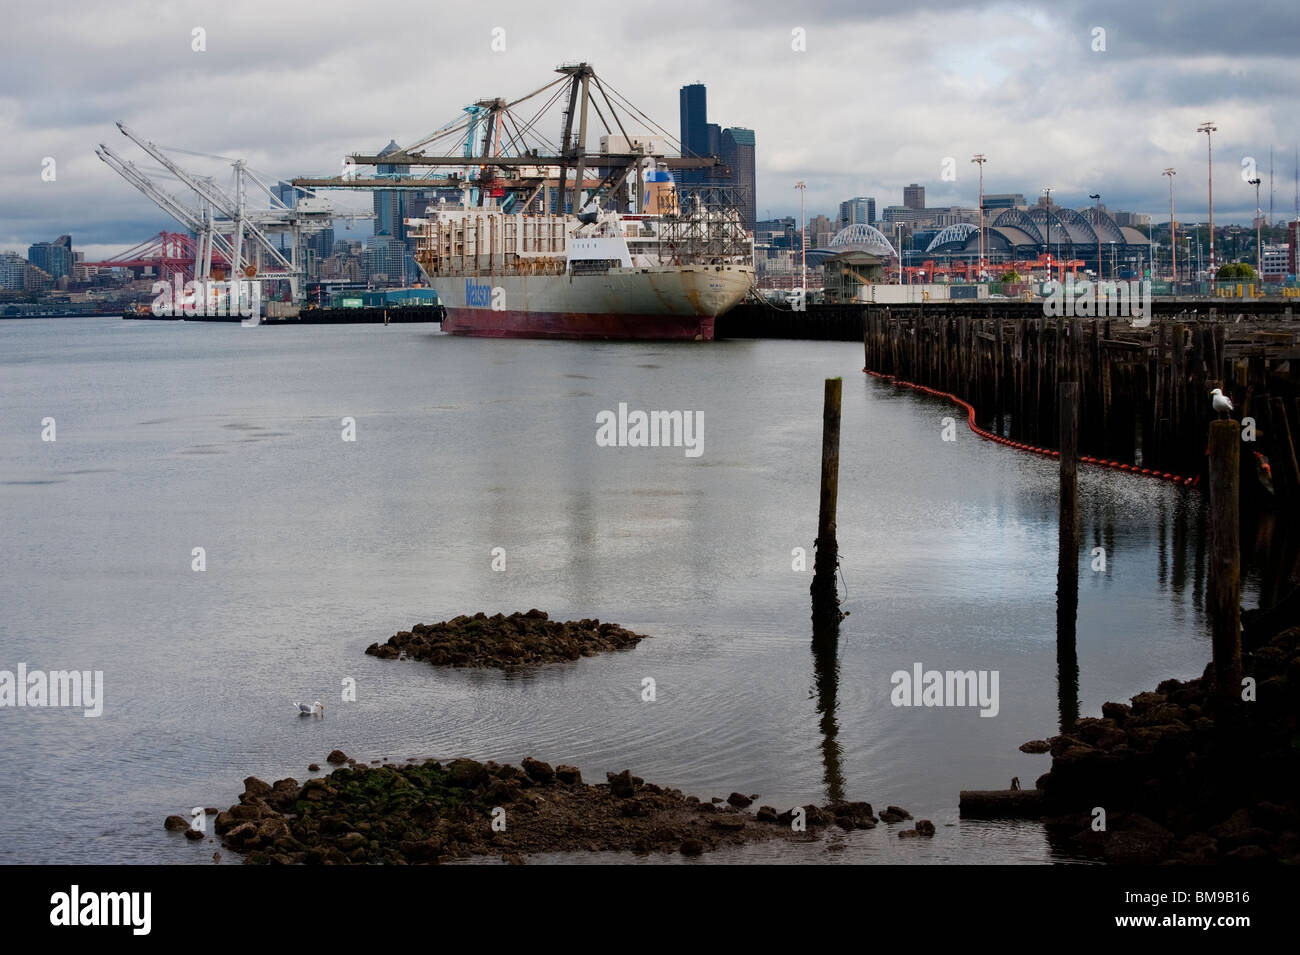 Port of Seattle, Seattle, Washington, USA. Cargo ships are loaded with containers by huge cranes to travel to far ports of call. Stock Photo